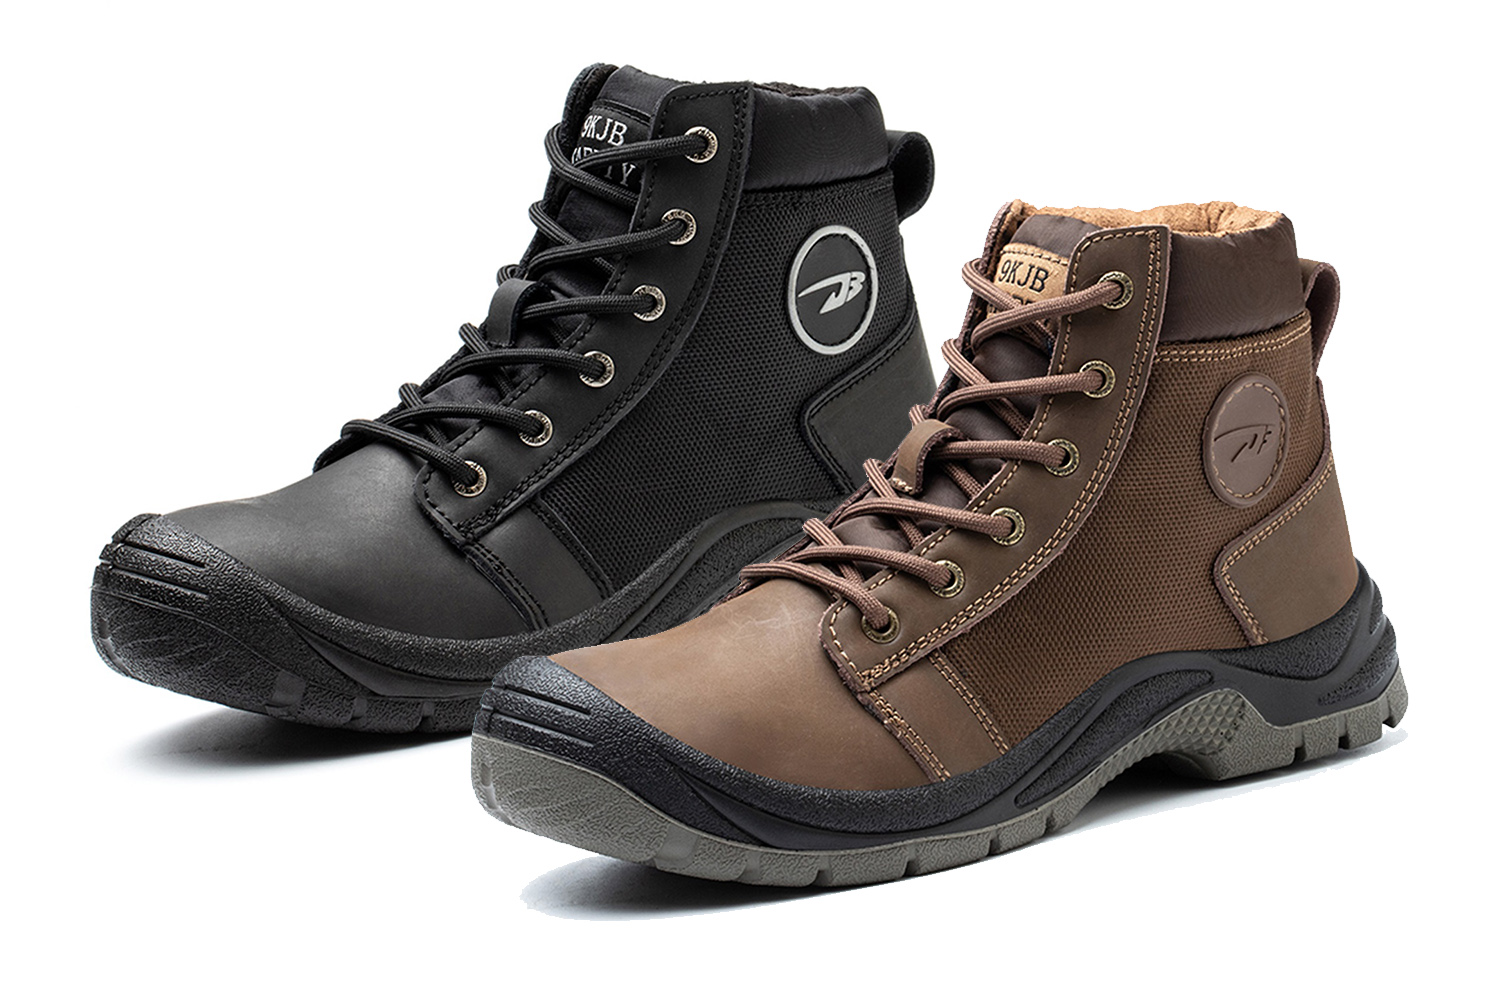 SAFEYEAR S3 Work Boots for Men & Women, 8027NB Safety Shoes Men & Women High  ESD, Waterproof & Breathable Leather, Light & Comfortable Insoles, S3 Steel  toe & Steel Plate: Amazon.co.uk: Fashion